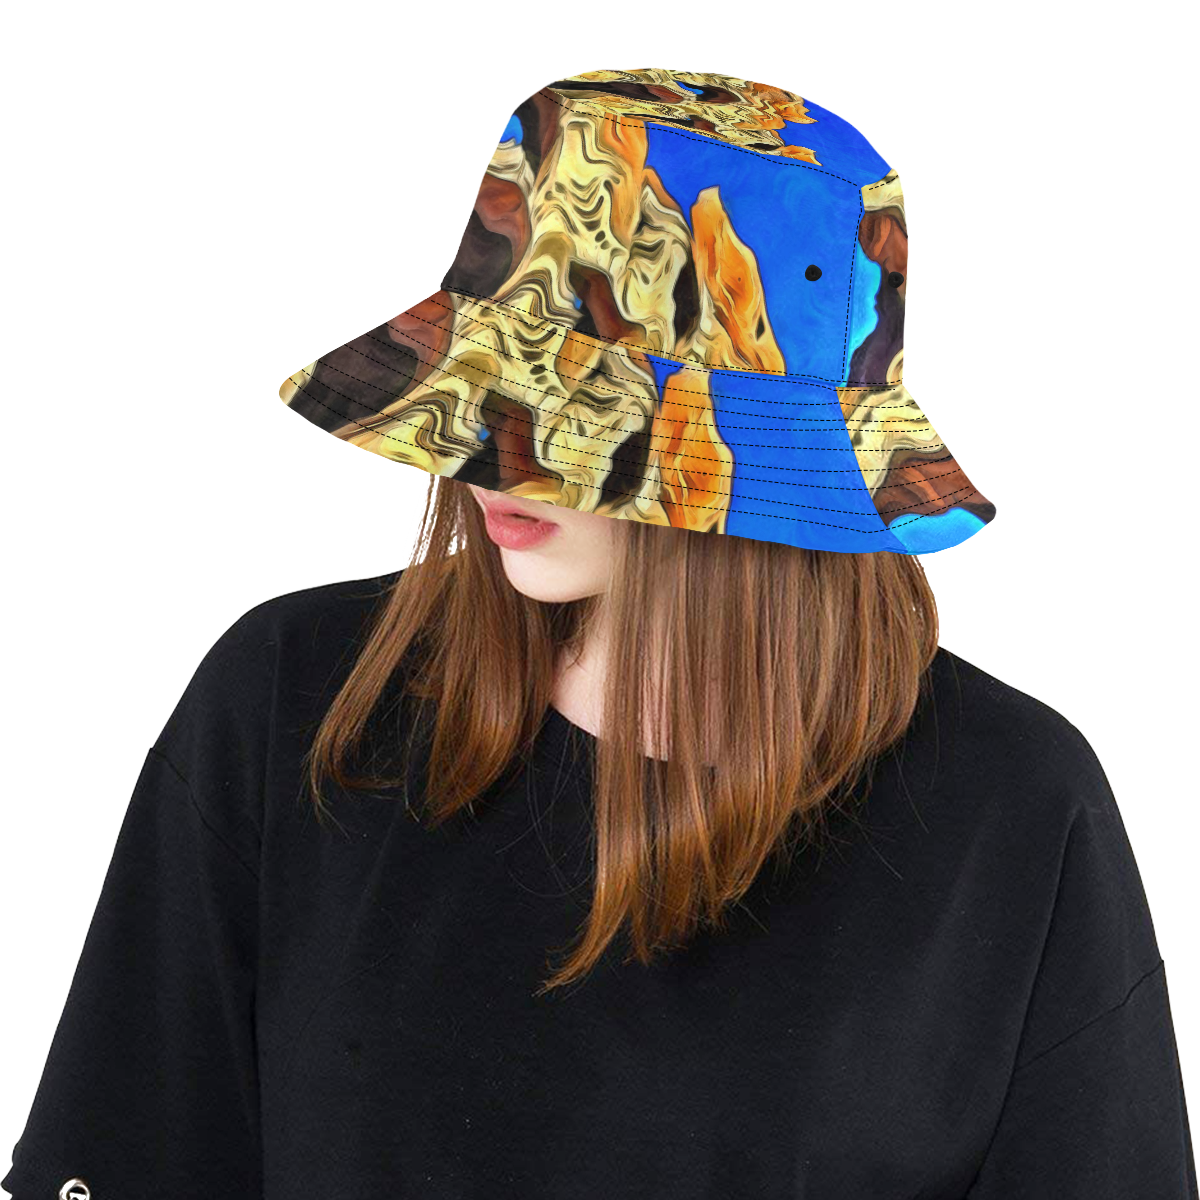 Colosseum Rome Italy Sunny Day KPA All Over Print Bucket Hat